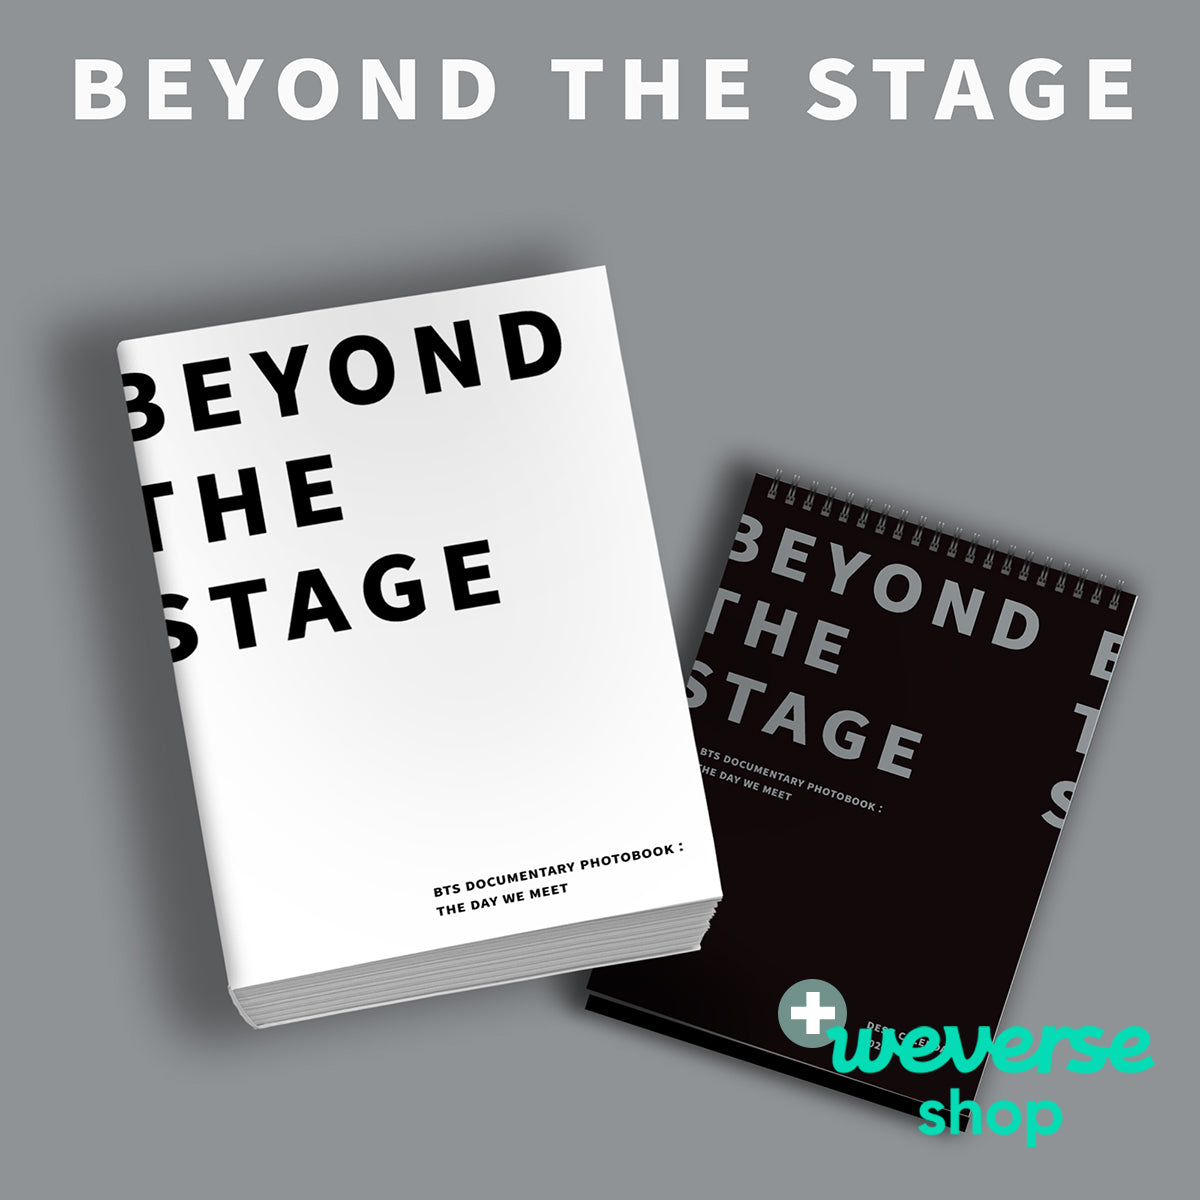 BTS - 'BEYOND THE STAGE' BTS DOCUMENTARY PHOTOBOOK : THE DAY WE MEET + Weverse Shop P.O.B